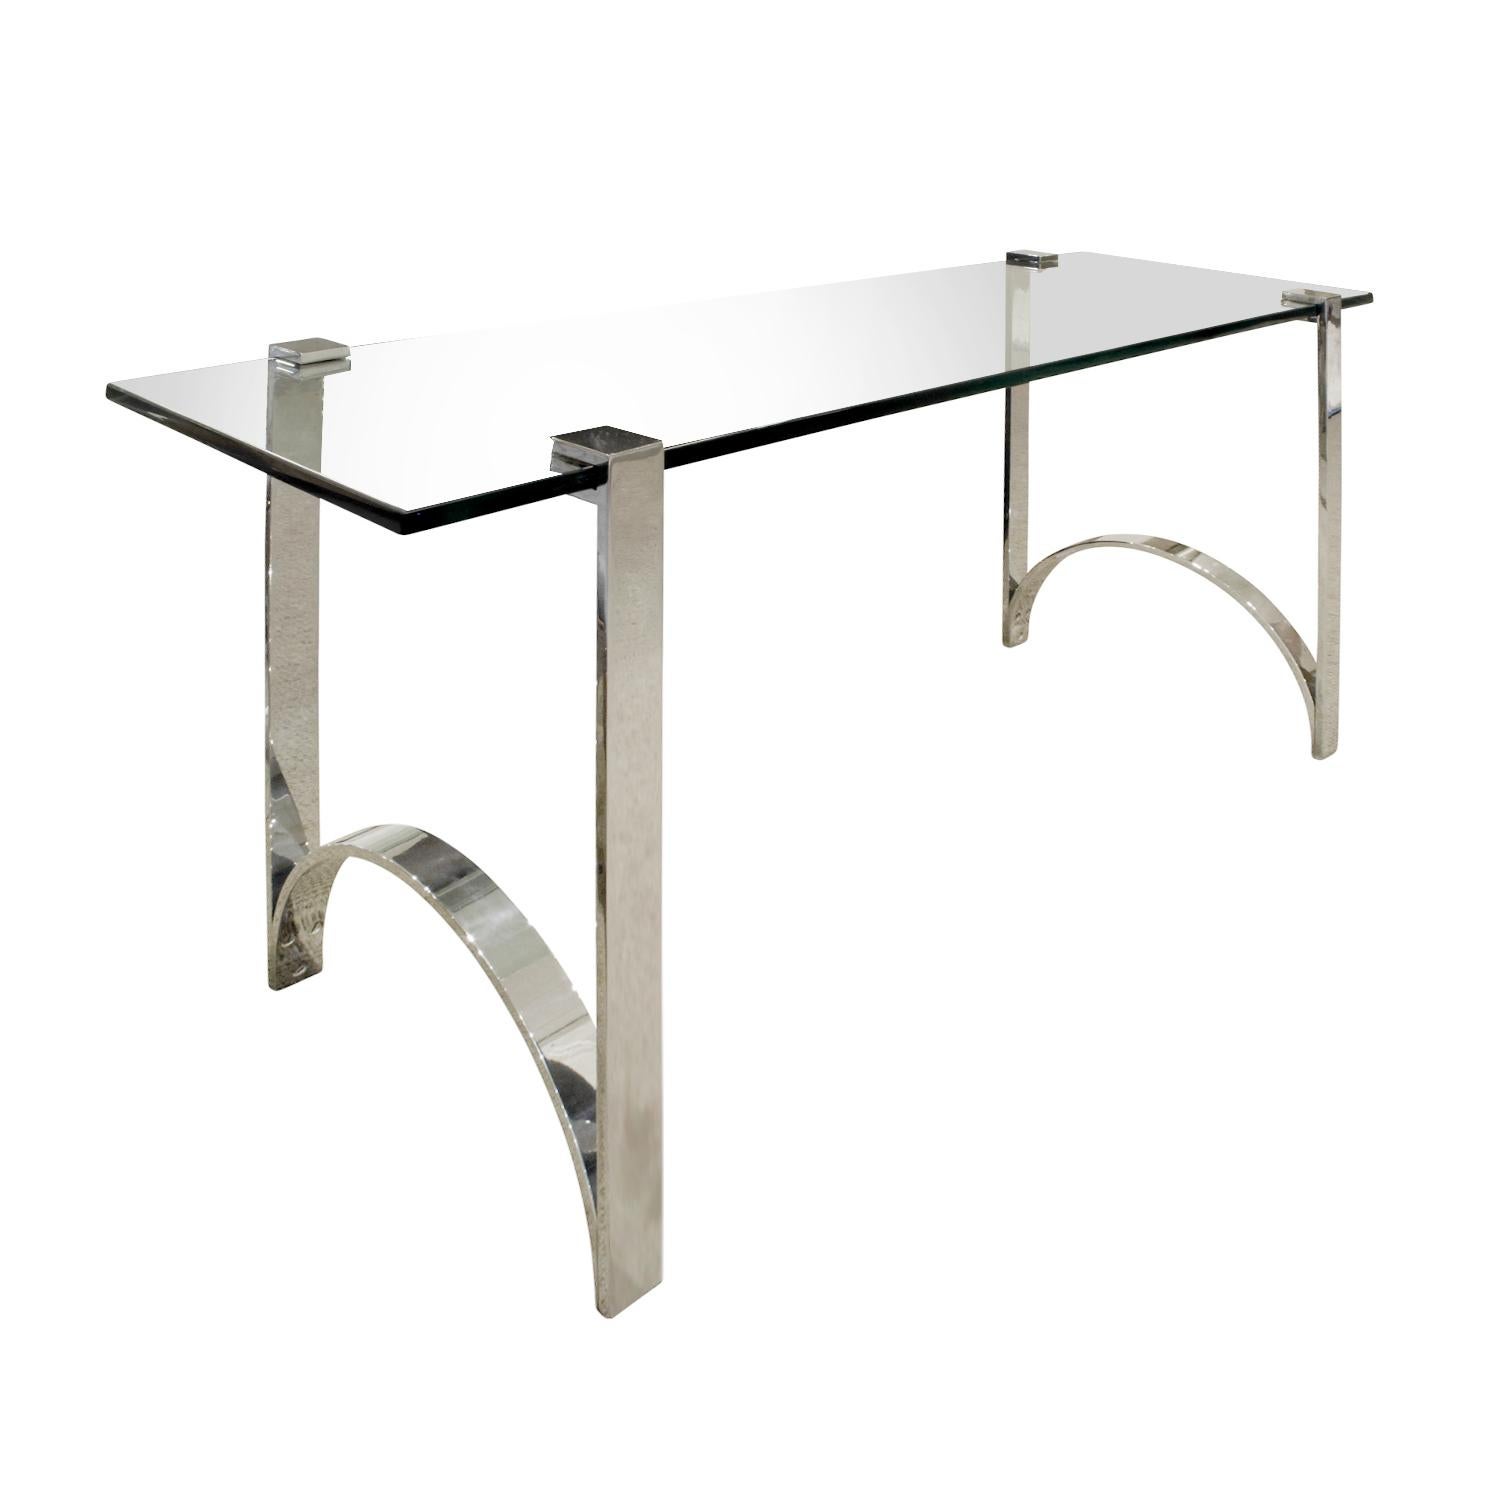 Console table with sculptural polished chrome supports with inset glass top, American, 1970s. A new glass top can be fabricated to spec. if different dimensions are required.